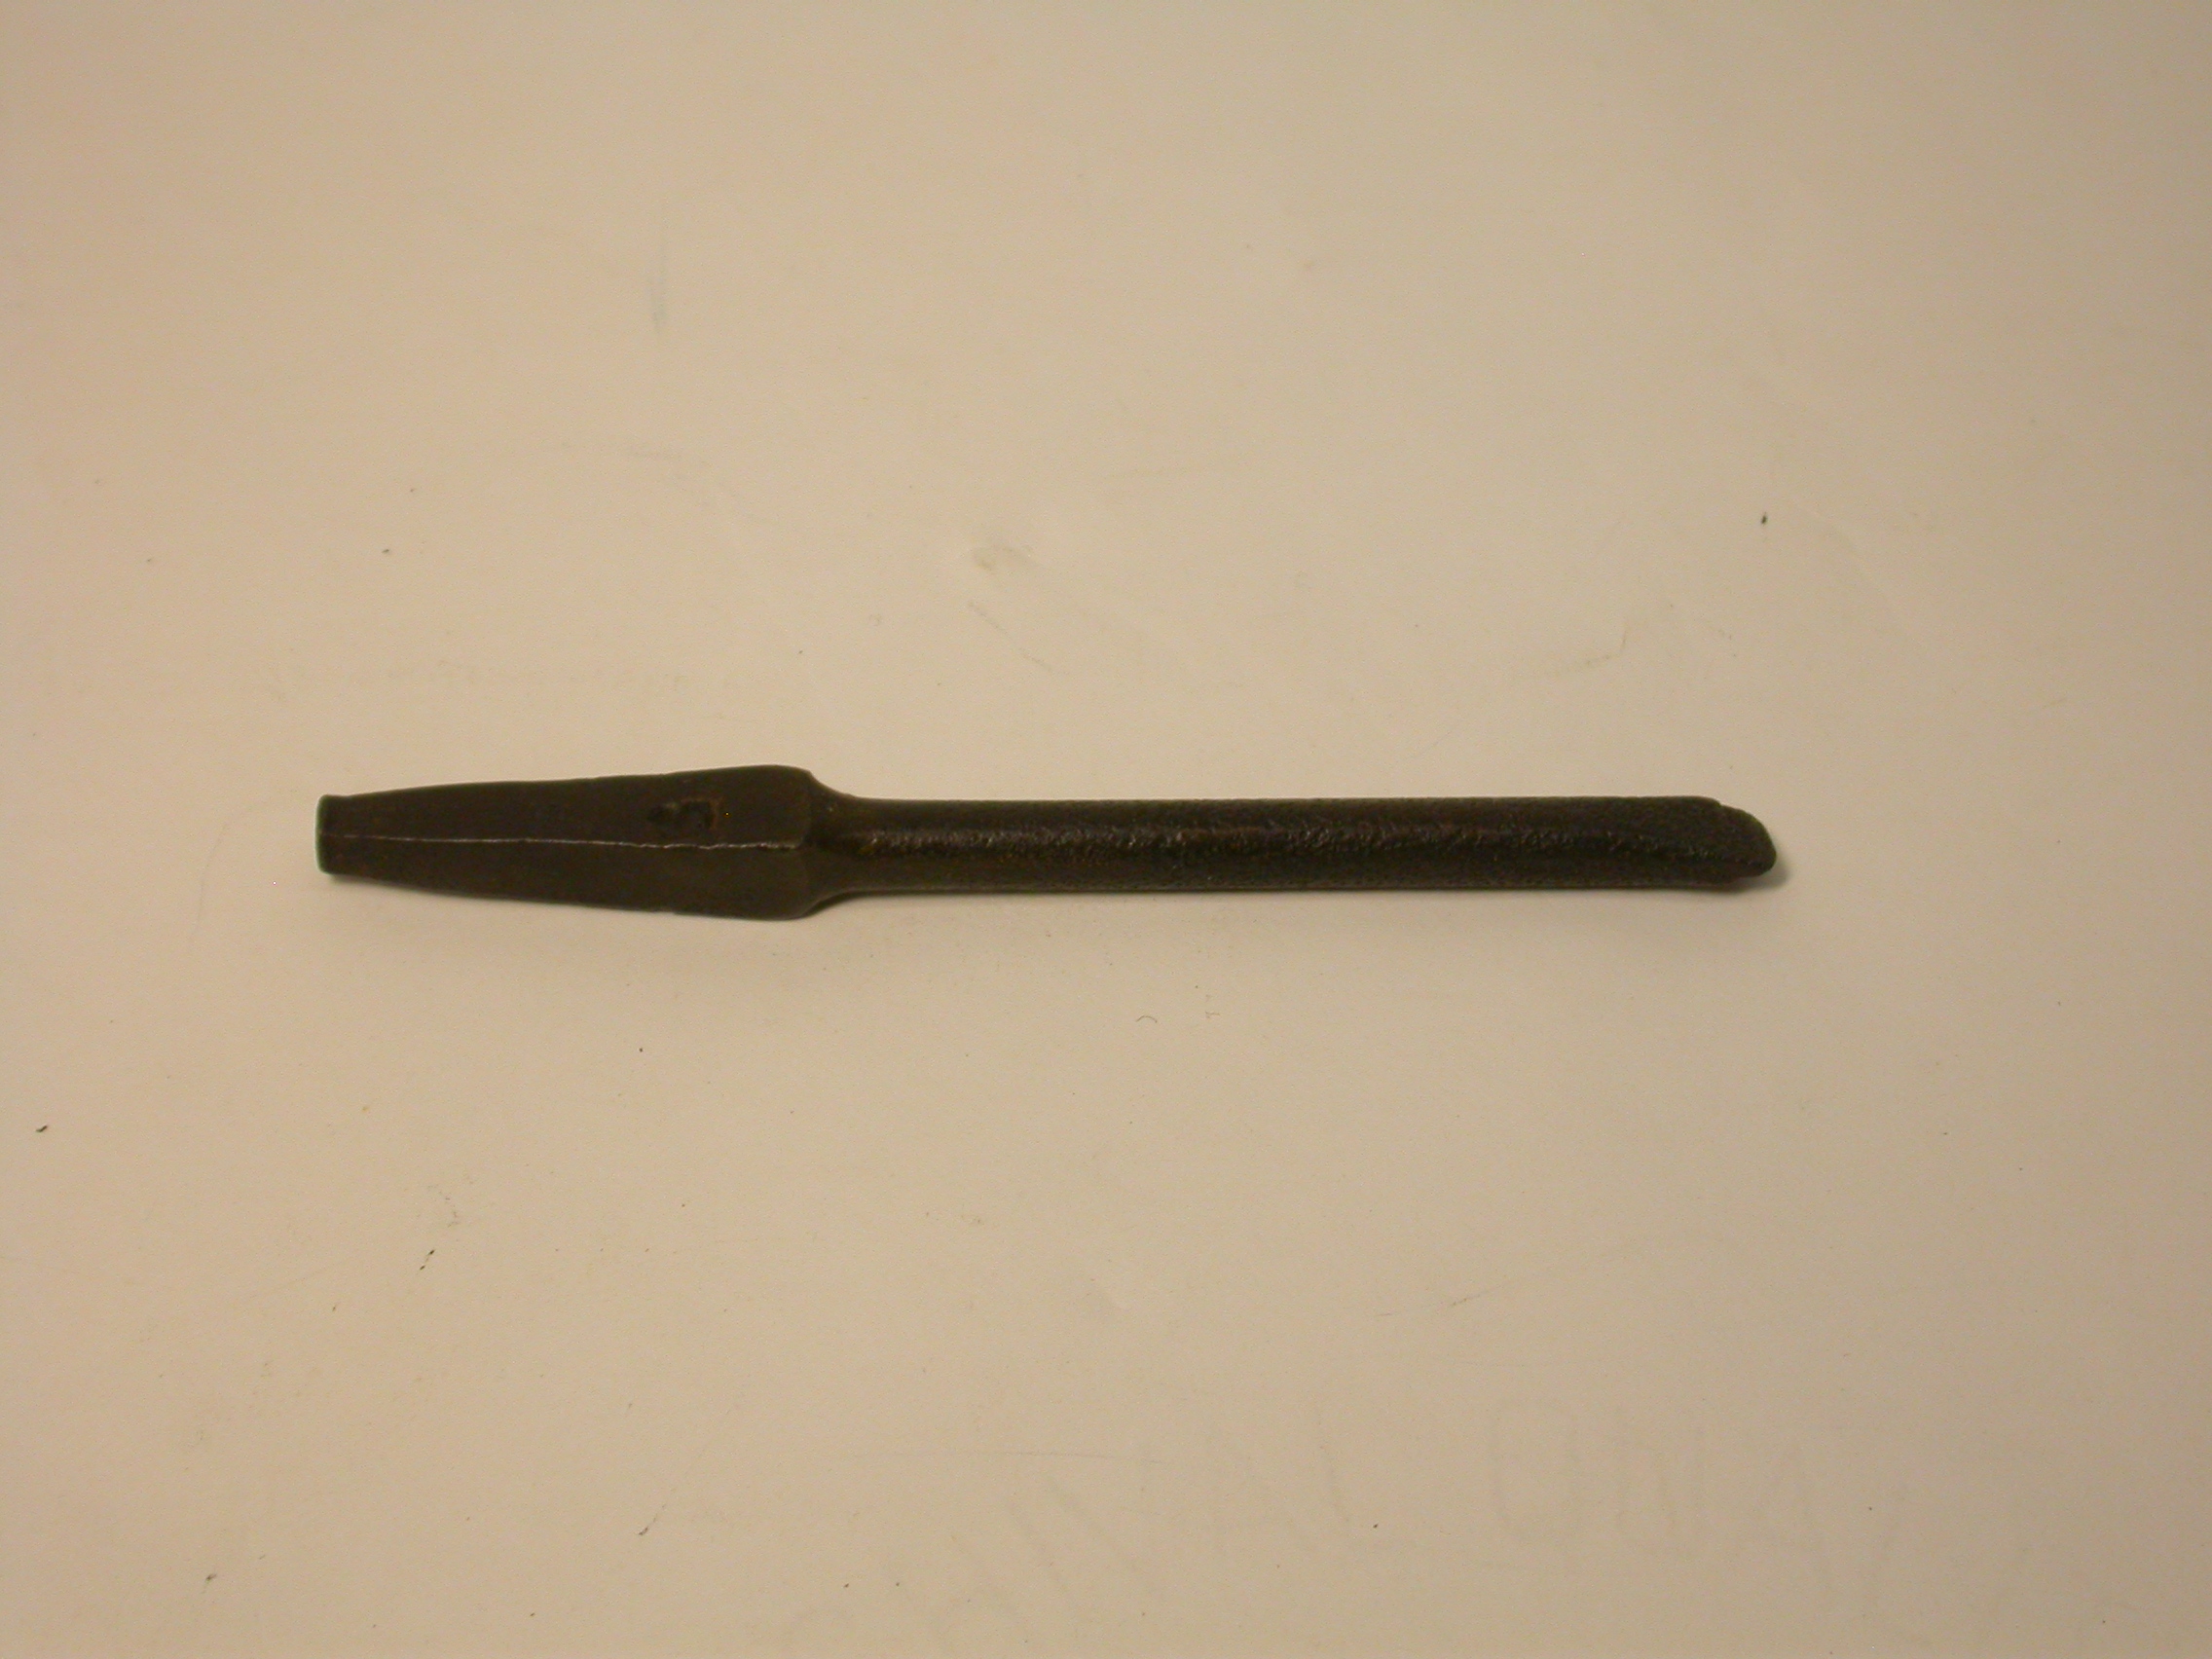 a%20metal%20bit%20with%20a%20square%20shank